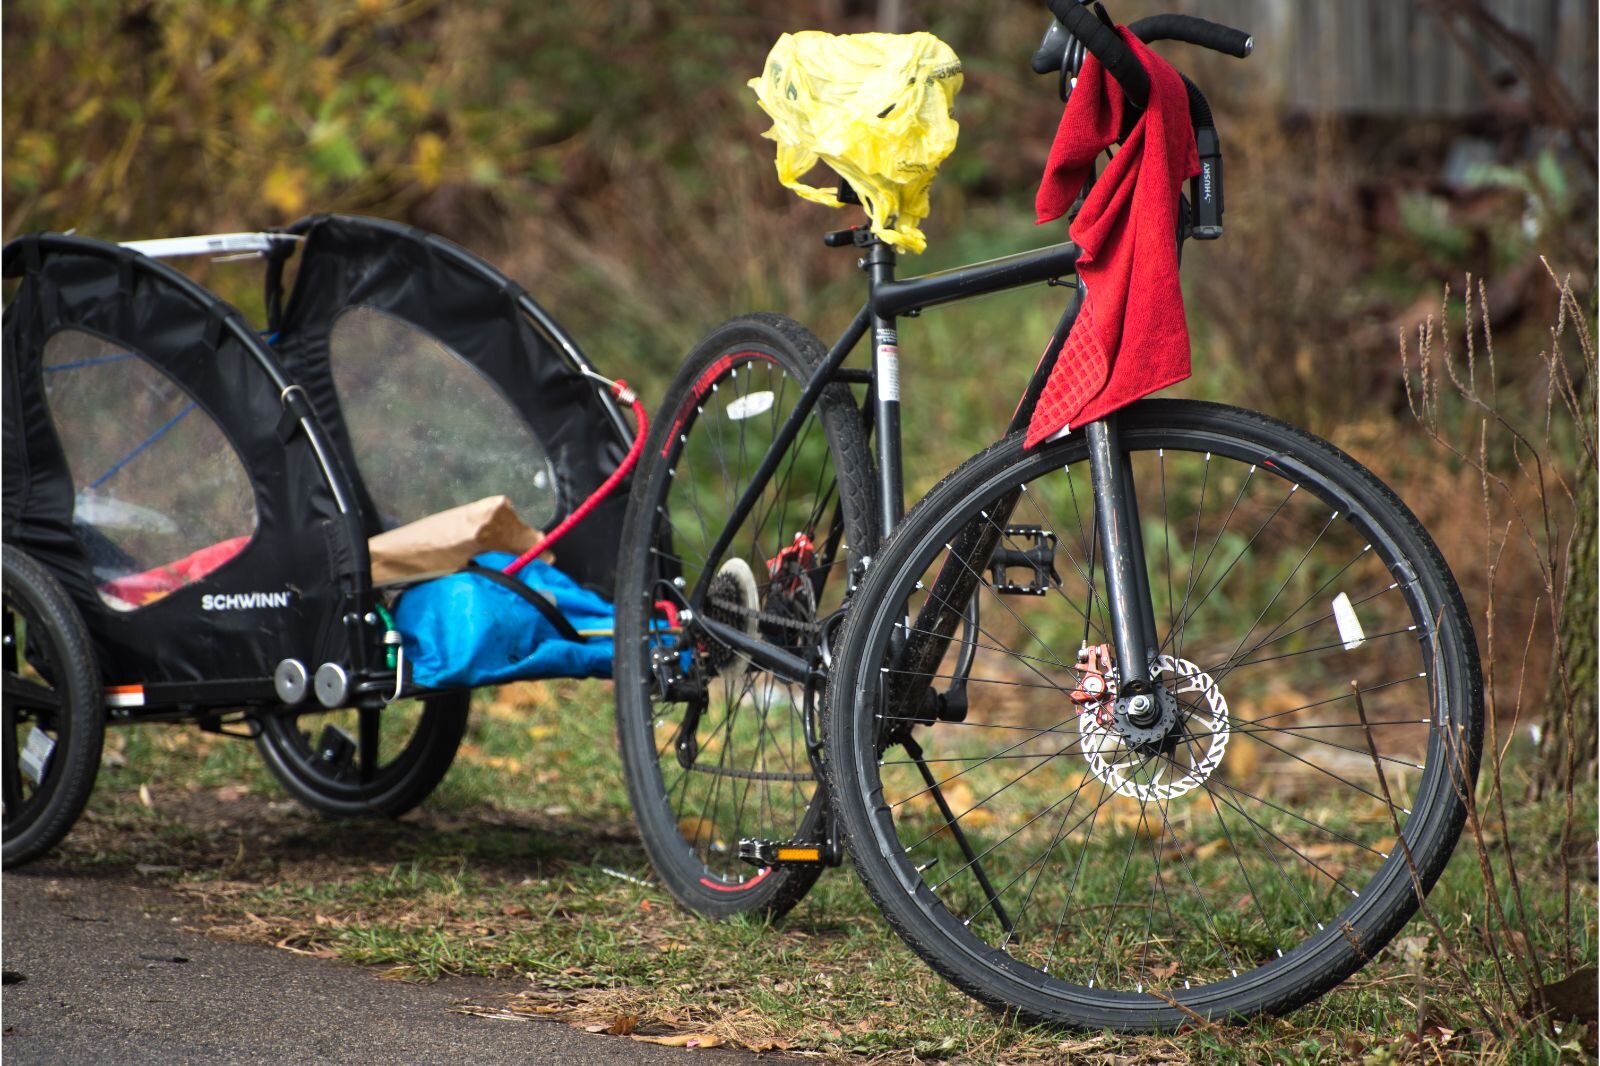 One of Kalamazoo's unsheltered's chief means of transportation: the bicycle. Transportation issues is a huge barrier for the homeless in getting to hospitals and clinics.